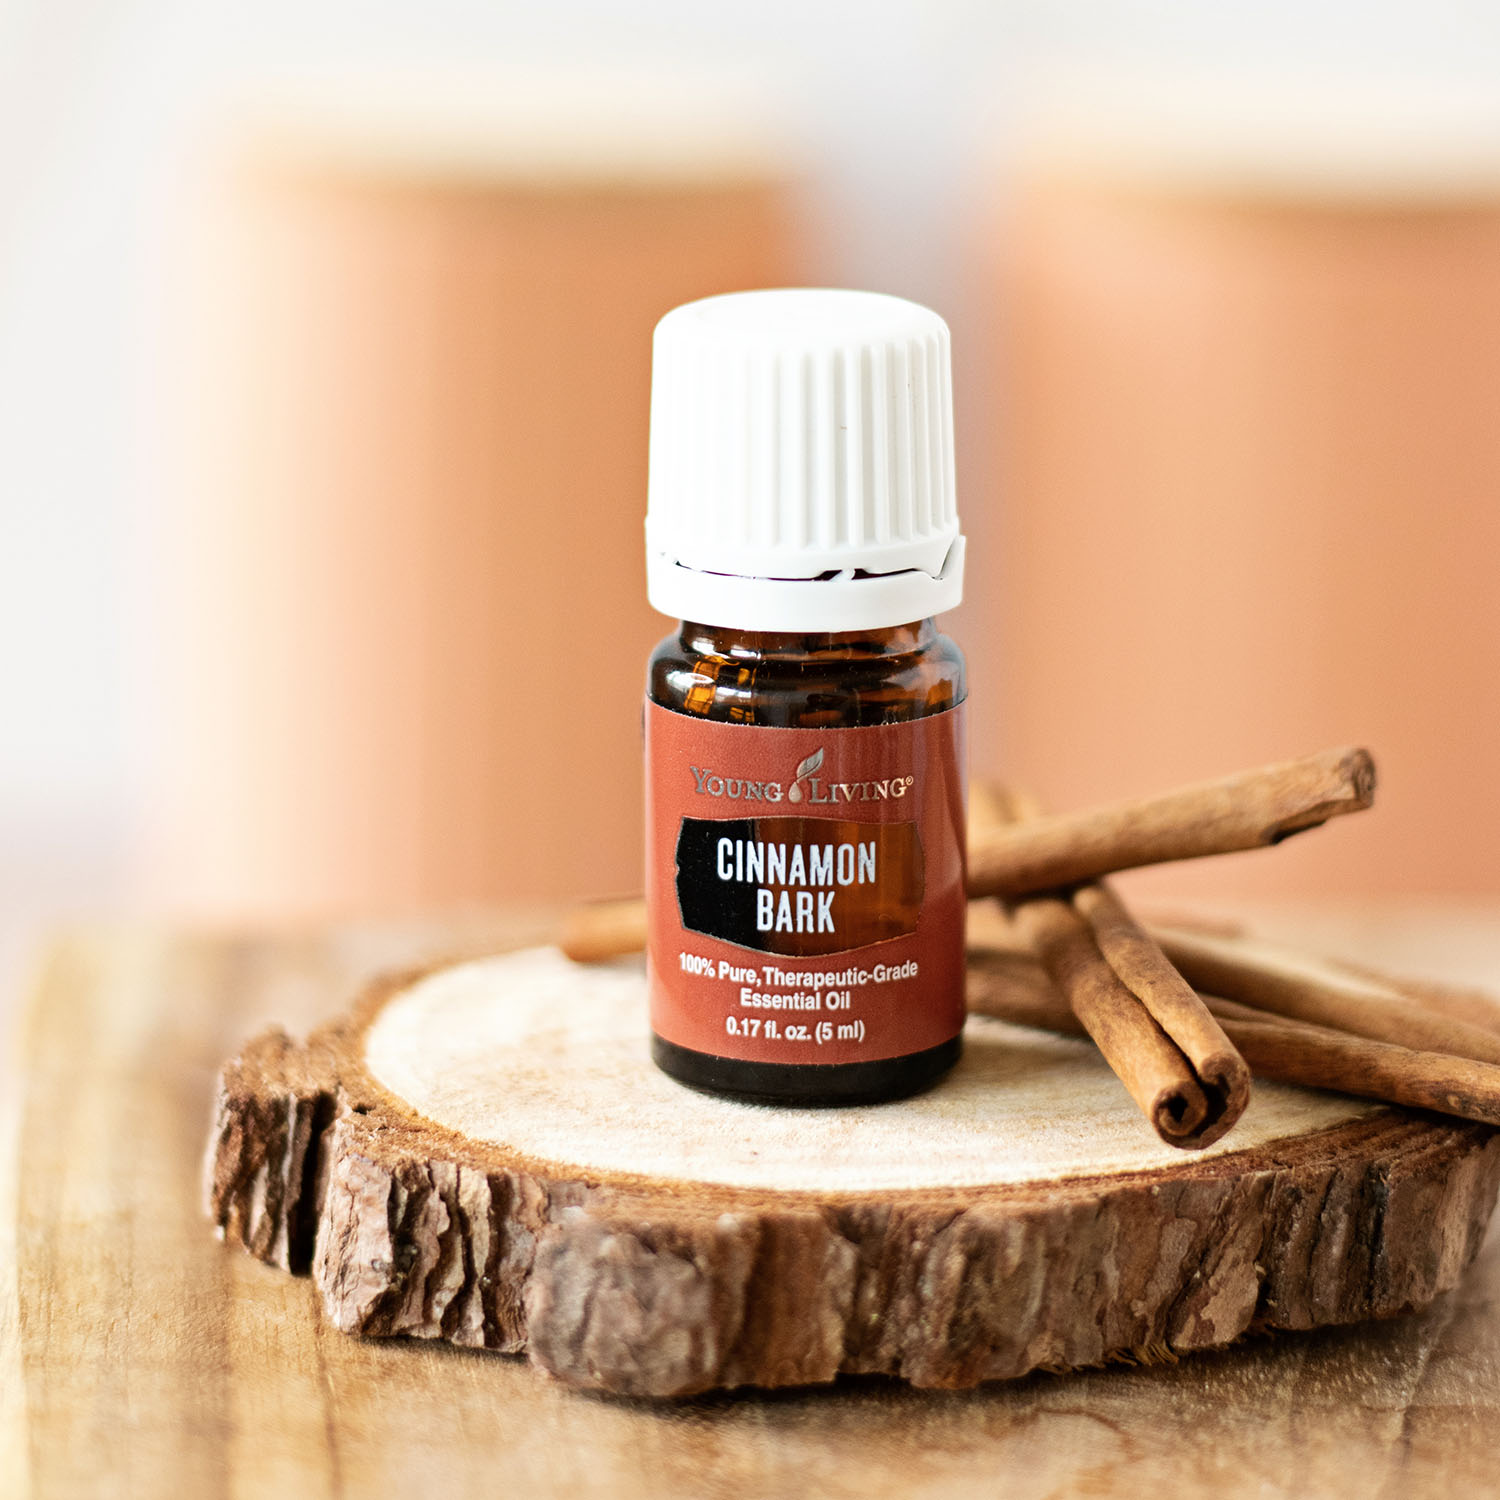 How to Use Cinnamon Essential Oil